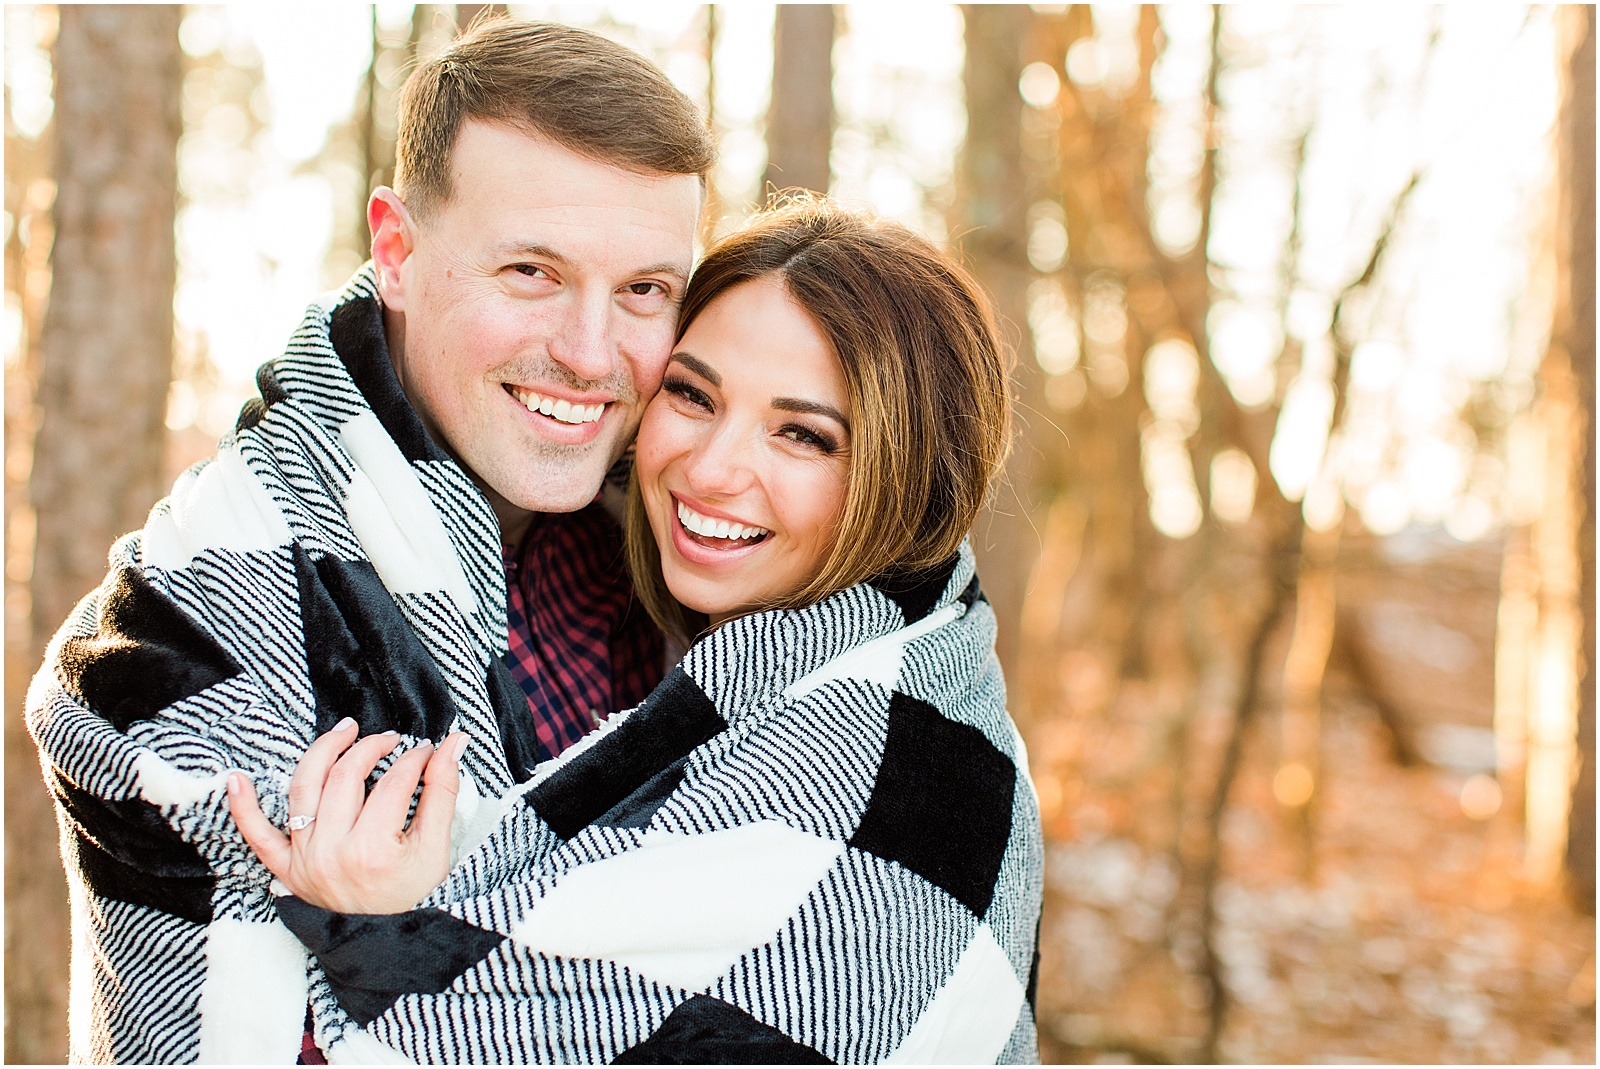 A Sunny Garden of the Gods Engagement Session | Shiloh and Lee | Bret and Brandie Photography043.jpg